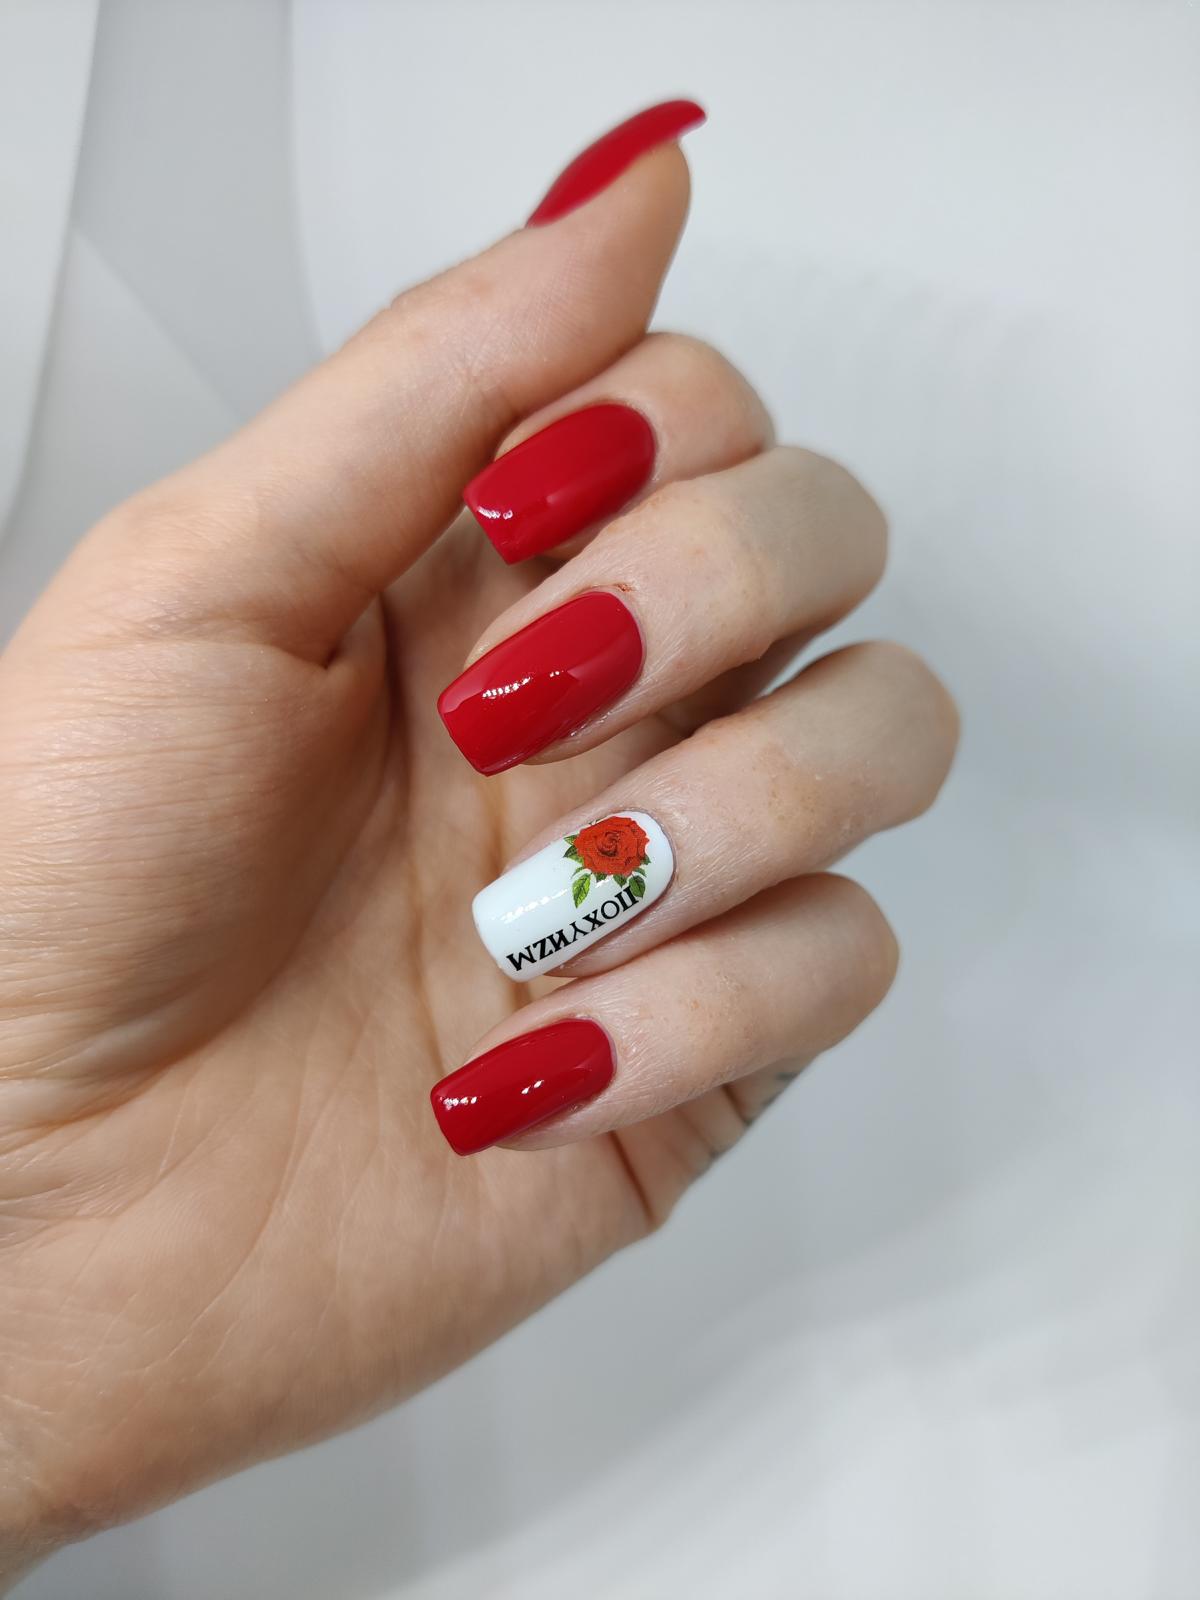 K1600_Copy of Classic Red Nails_